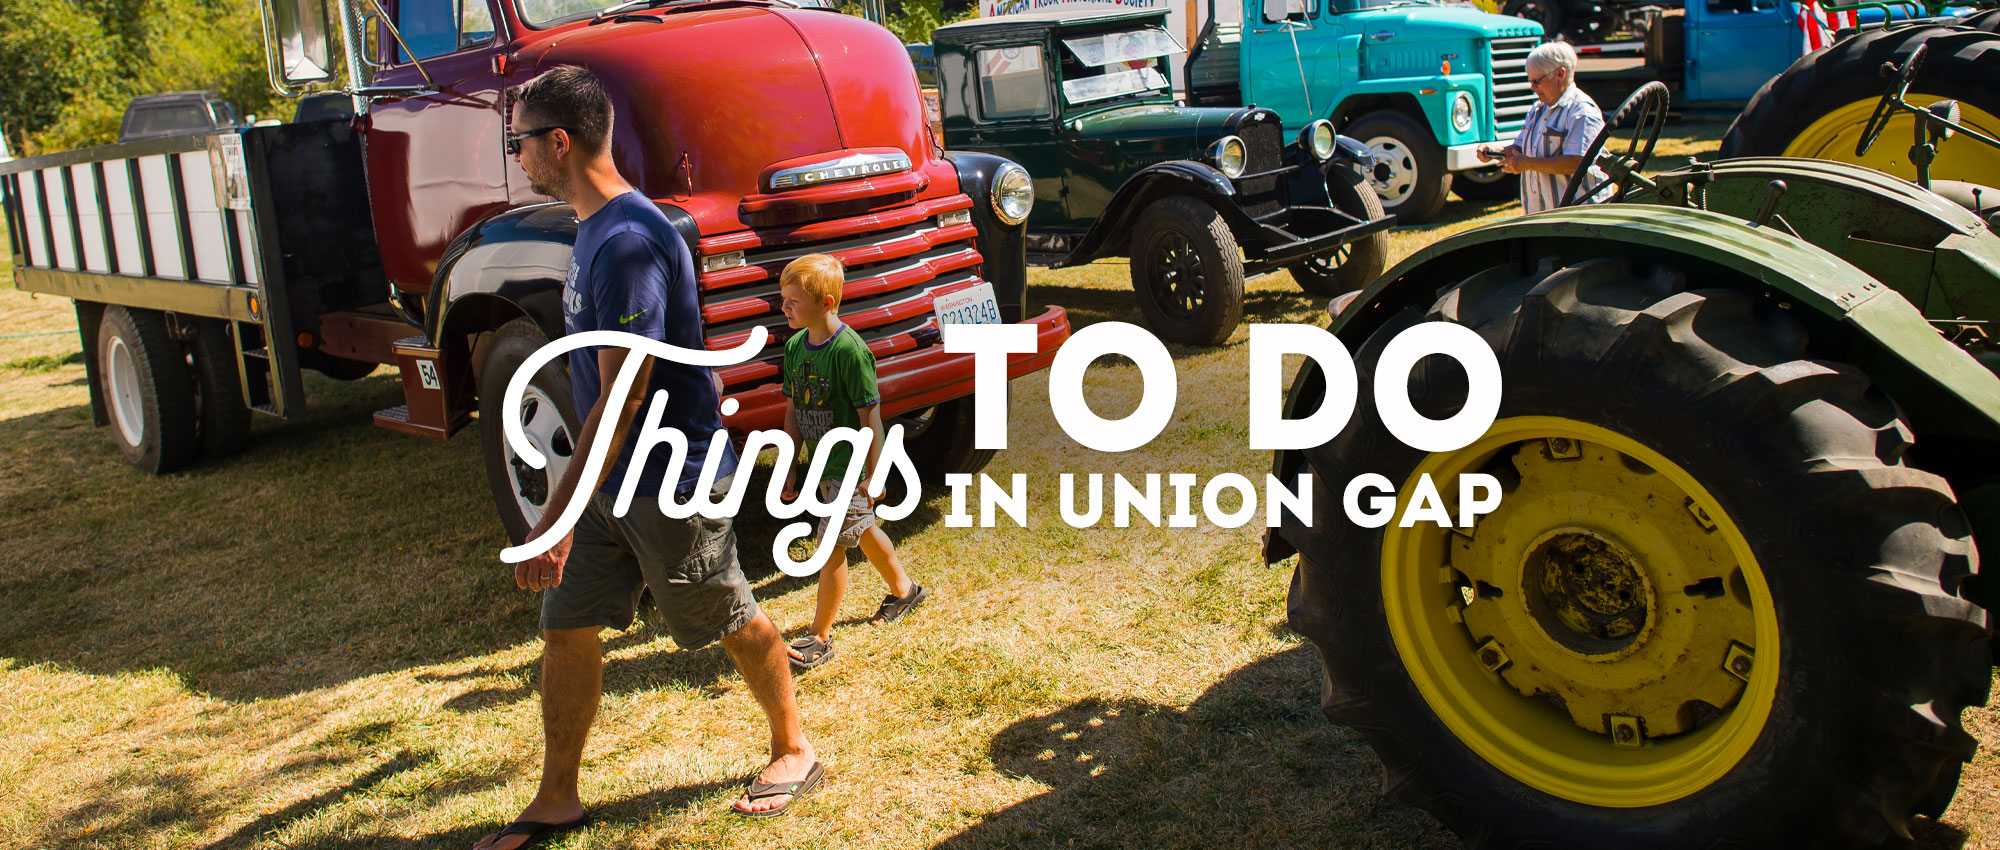 Union Gap, WA - Shopping, AG Museum, Wine Tasting, Breweries, Restaurants, Fresh Produce Stands